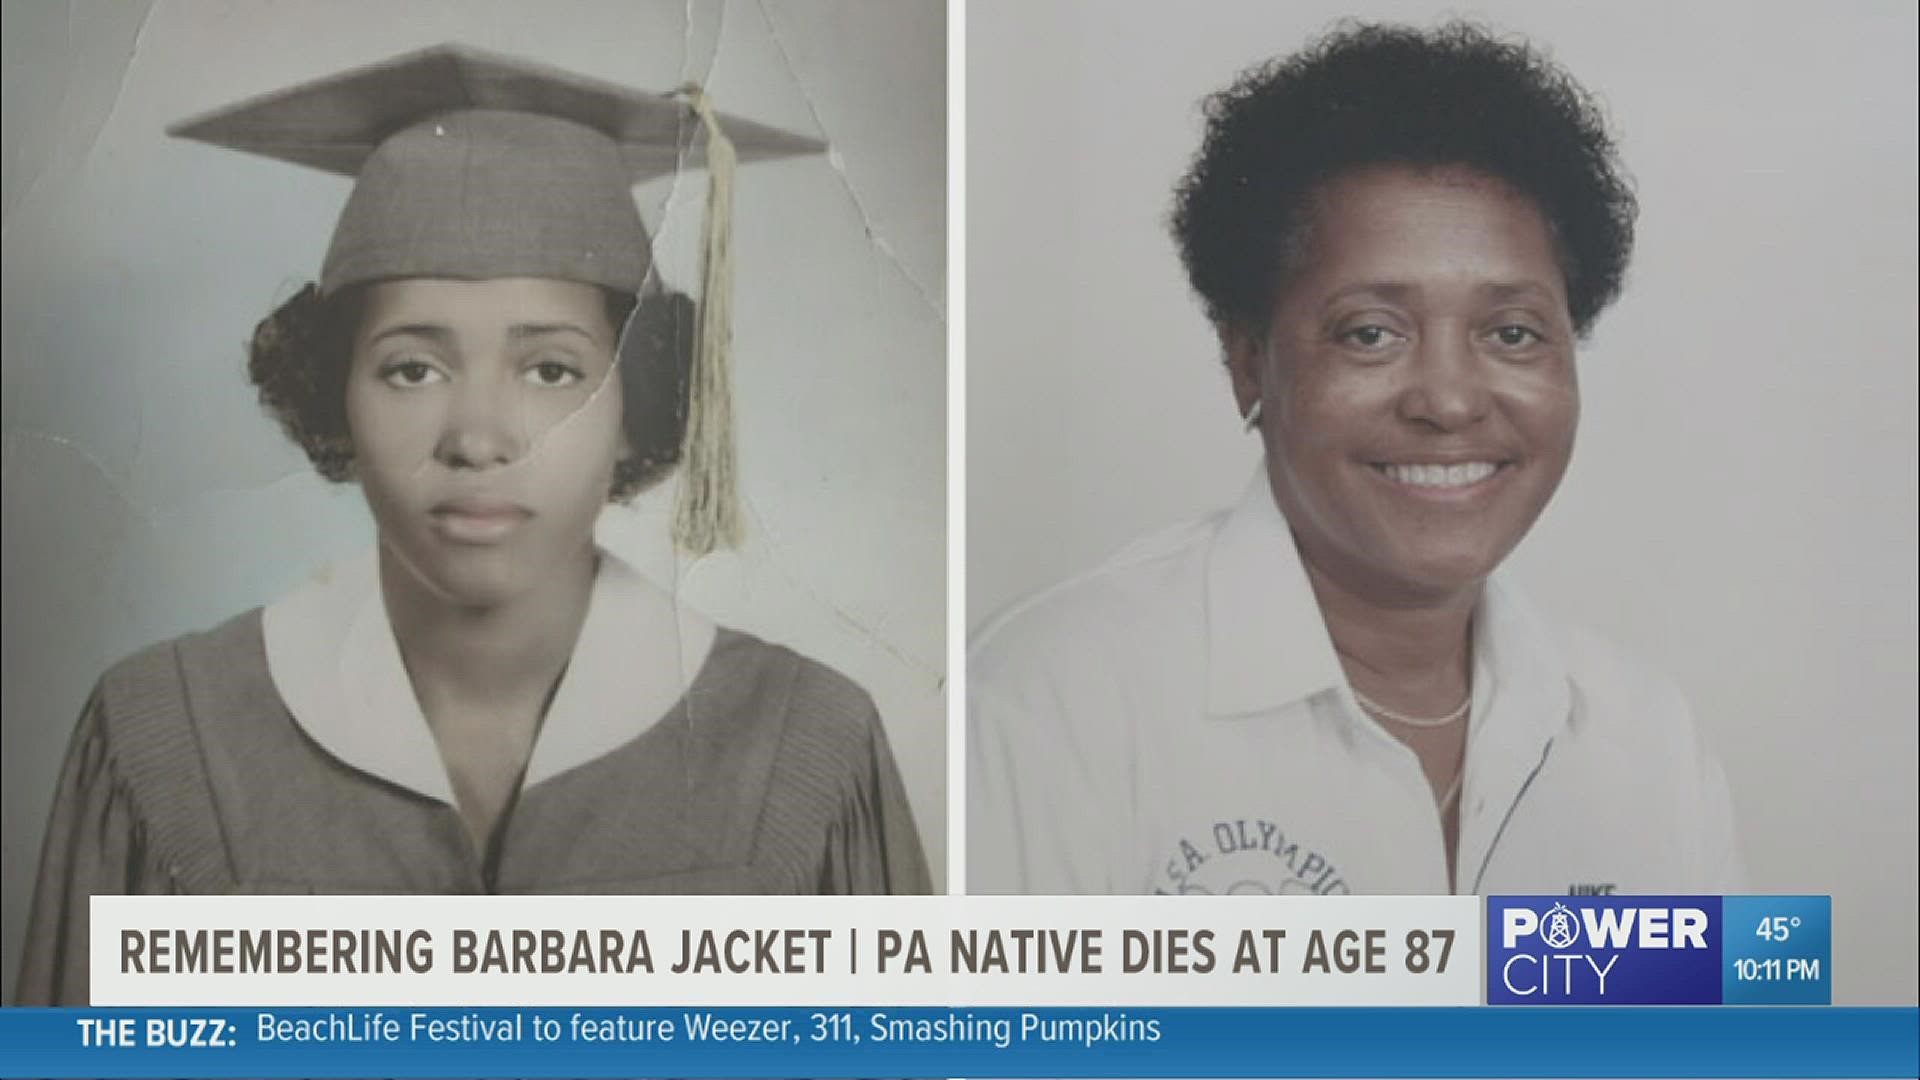 Barbara Jacket was known as one of the greatest women’s track and field coaches in the U.S.